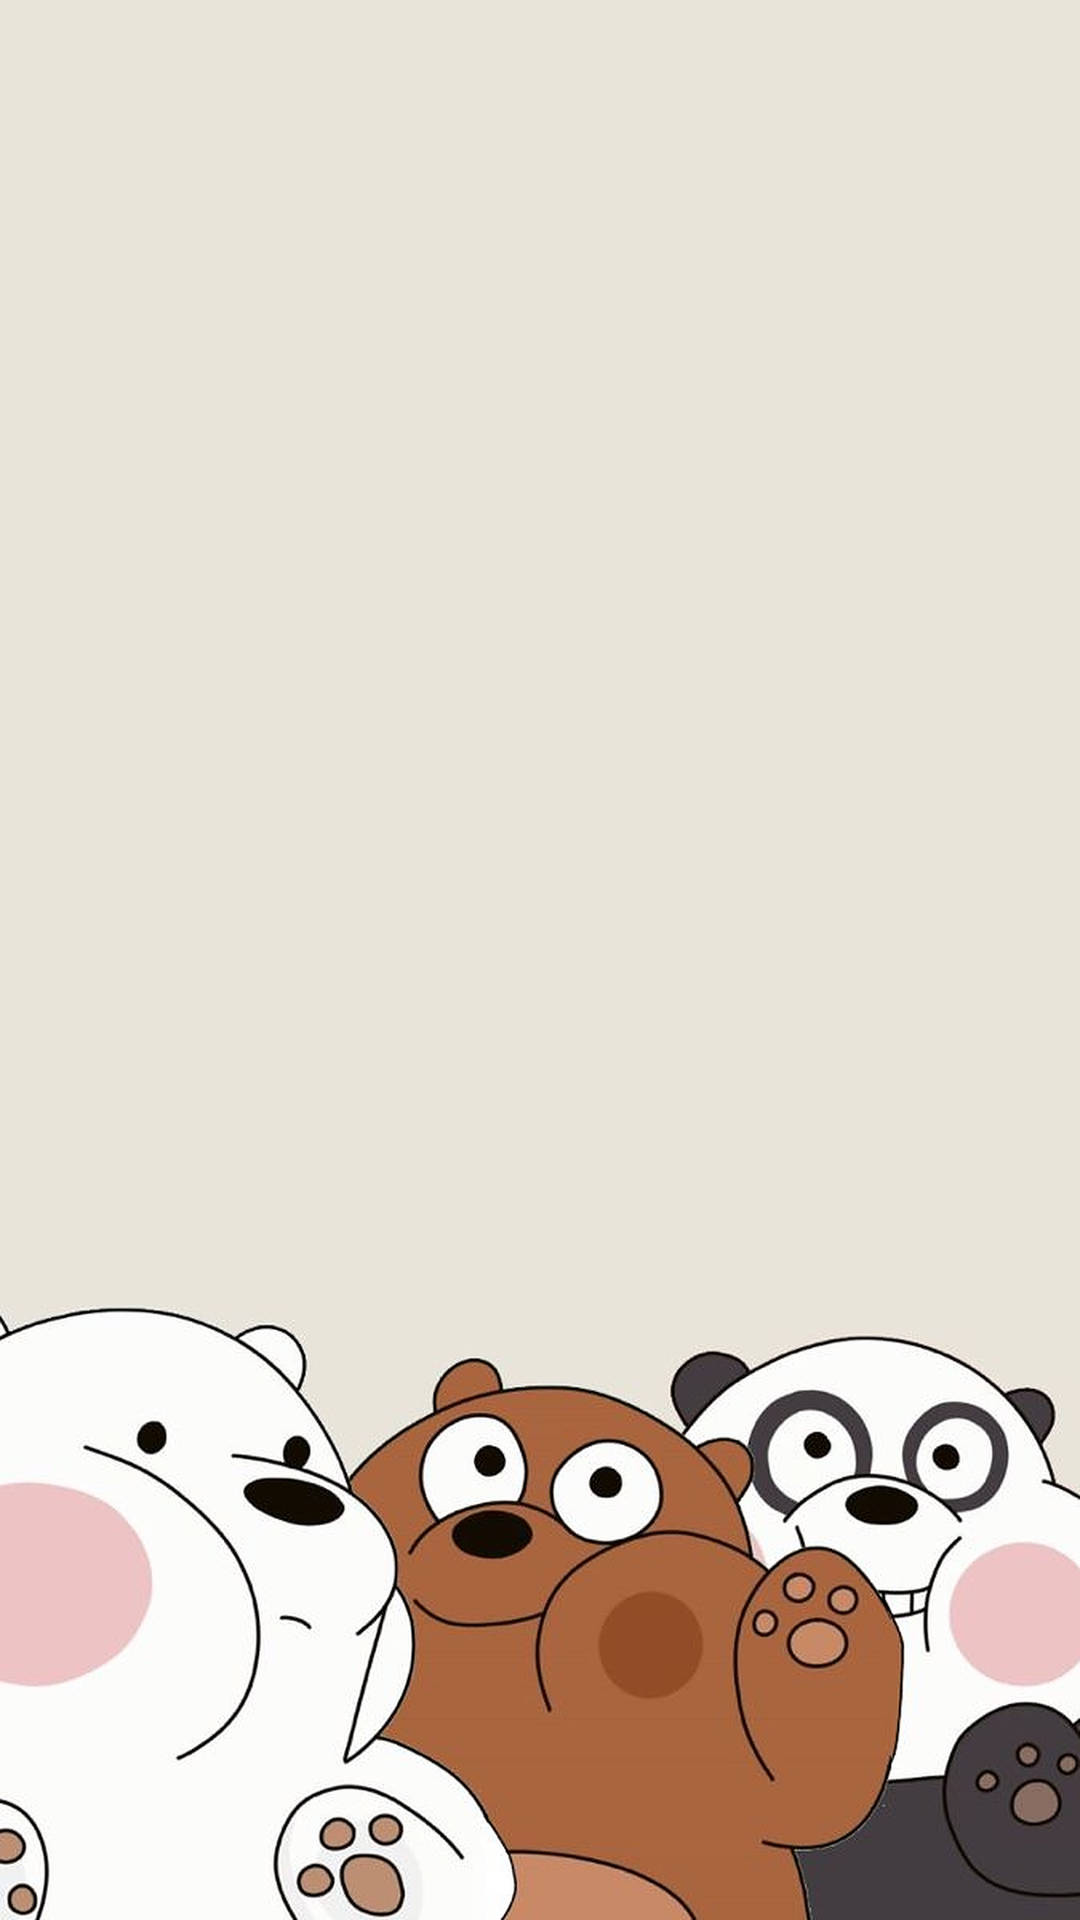 Three Adorable Bears Background